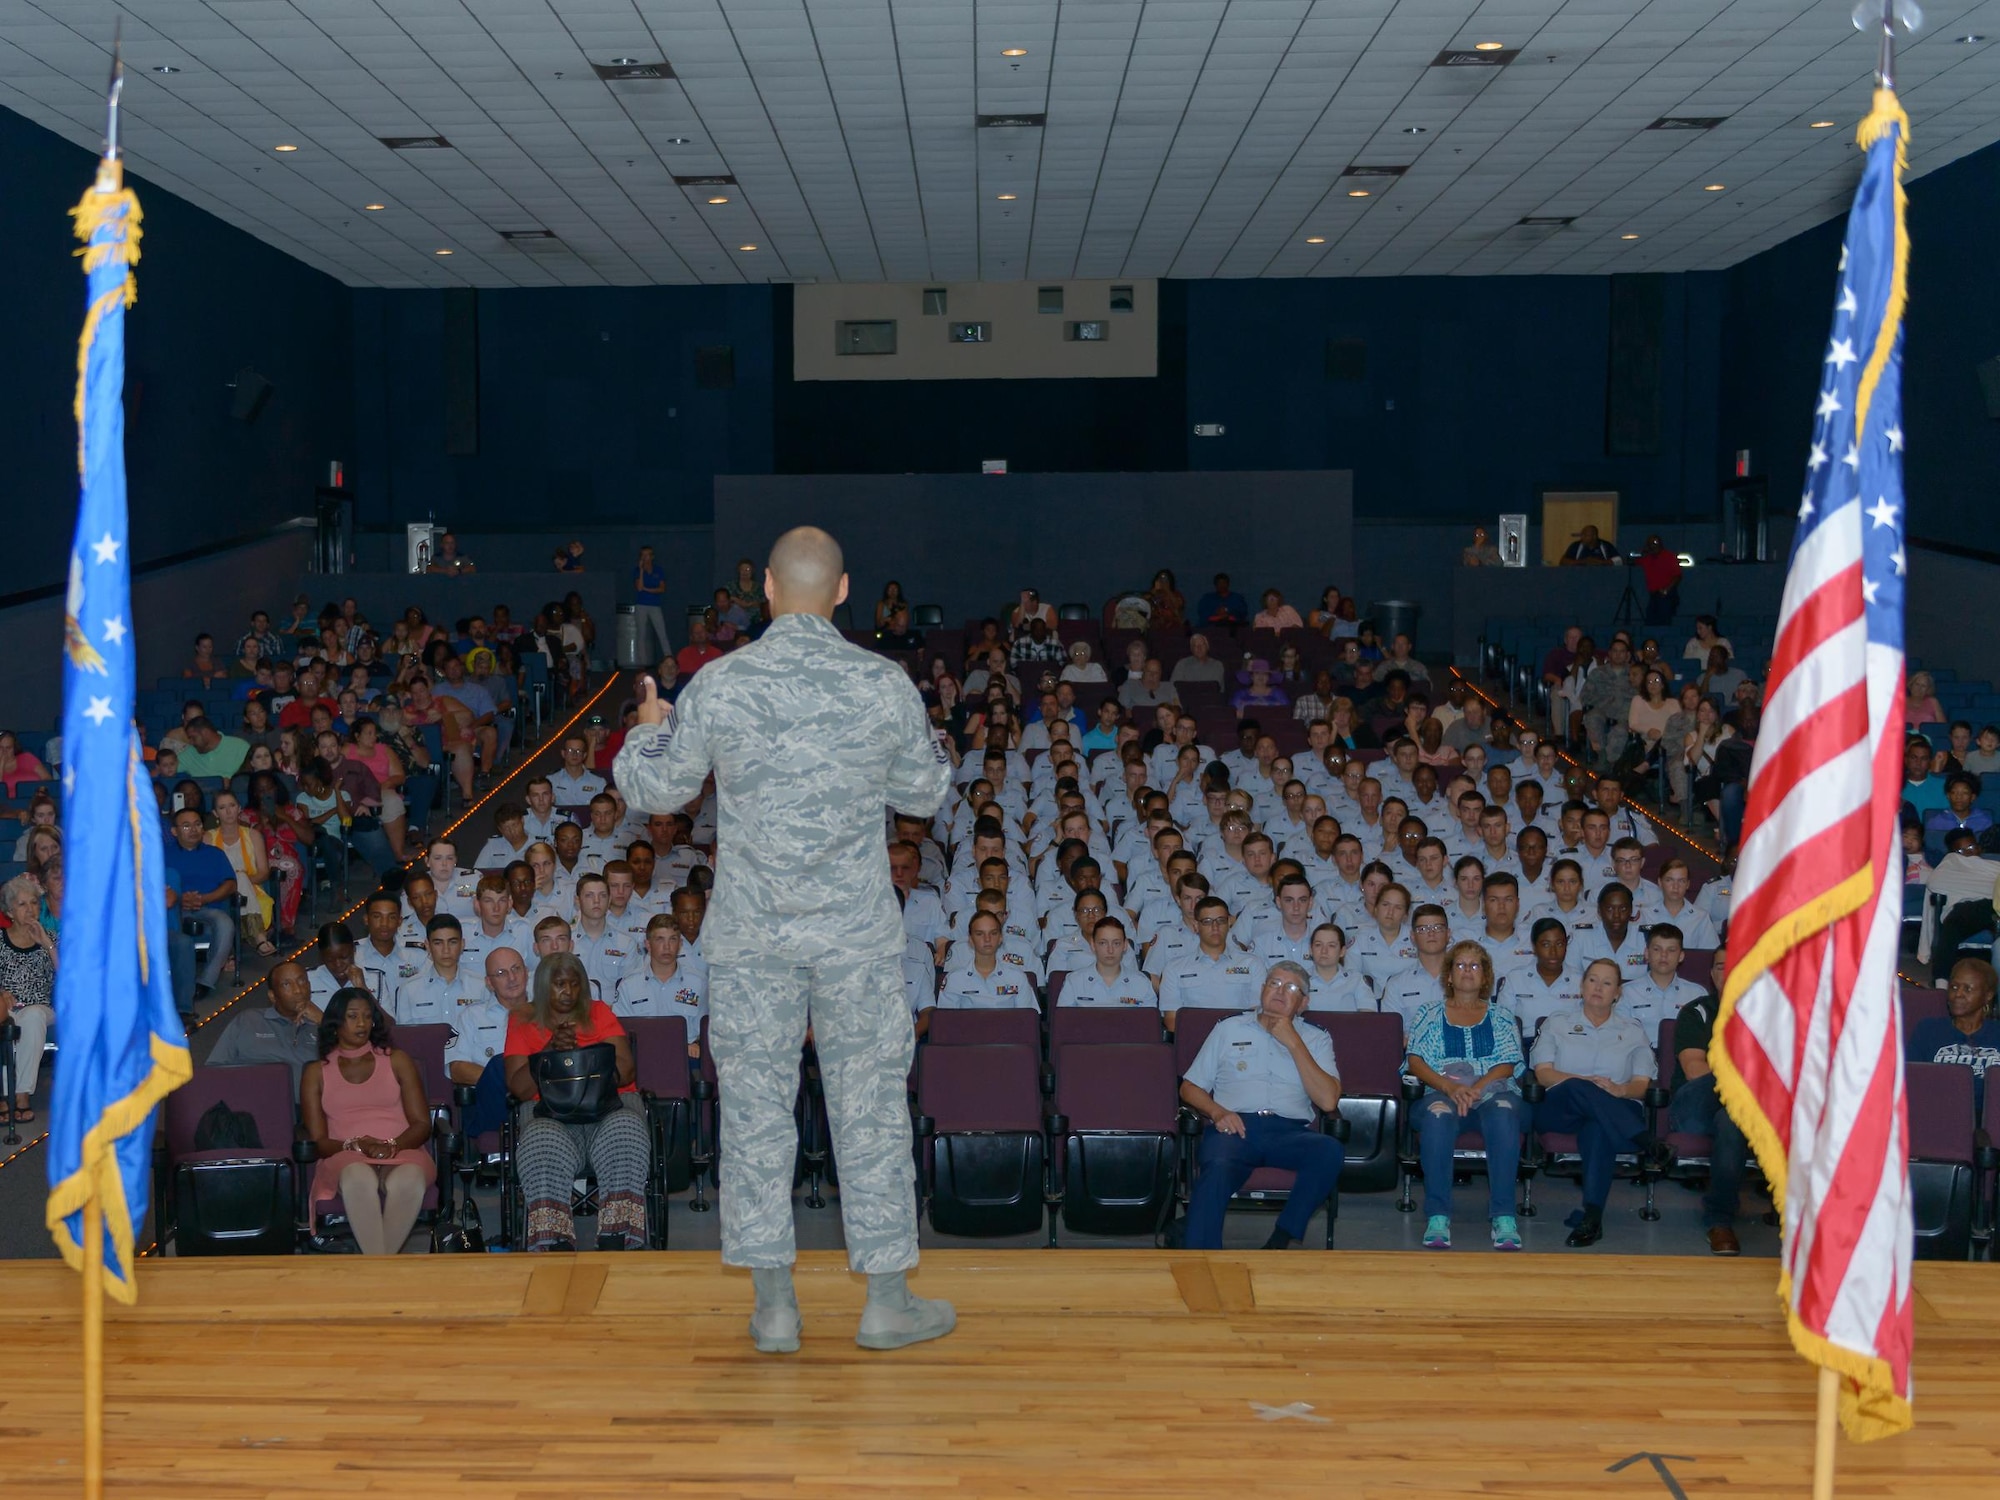 Chief Master Sgt. Rodney Deese II, Mathies NCO Academy commandant, speaks with Air Force Junior ROTC Cadets during the JROTC Cadet Leadership Course graduation at the Welch Theater July 14, 2017, on Keesler Air Force Base, Miss. Approximately 140 JROTC students from 15 high schools in five states attended the week-long course at Keesler that ended with a parade and graduation ceremony. (U.S. Air Force photo by André Askew)